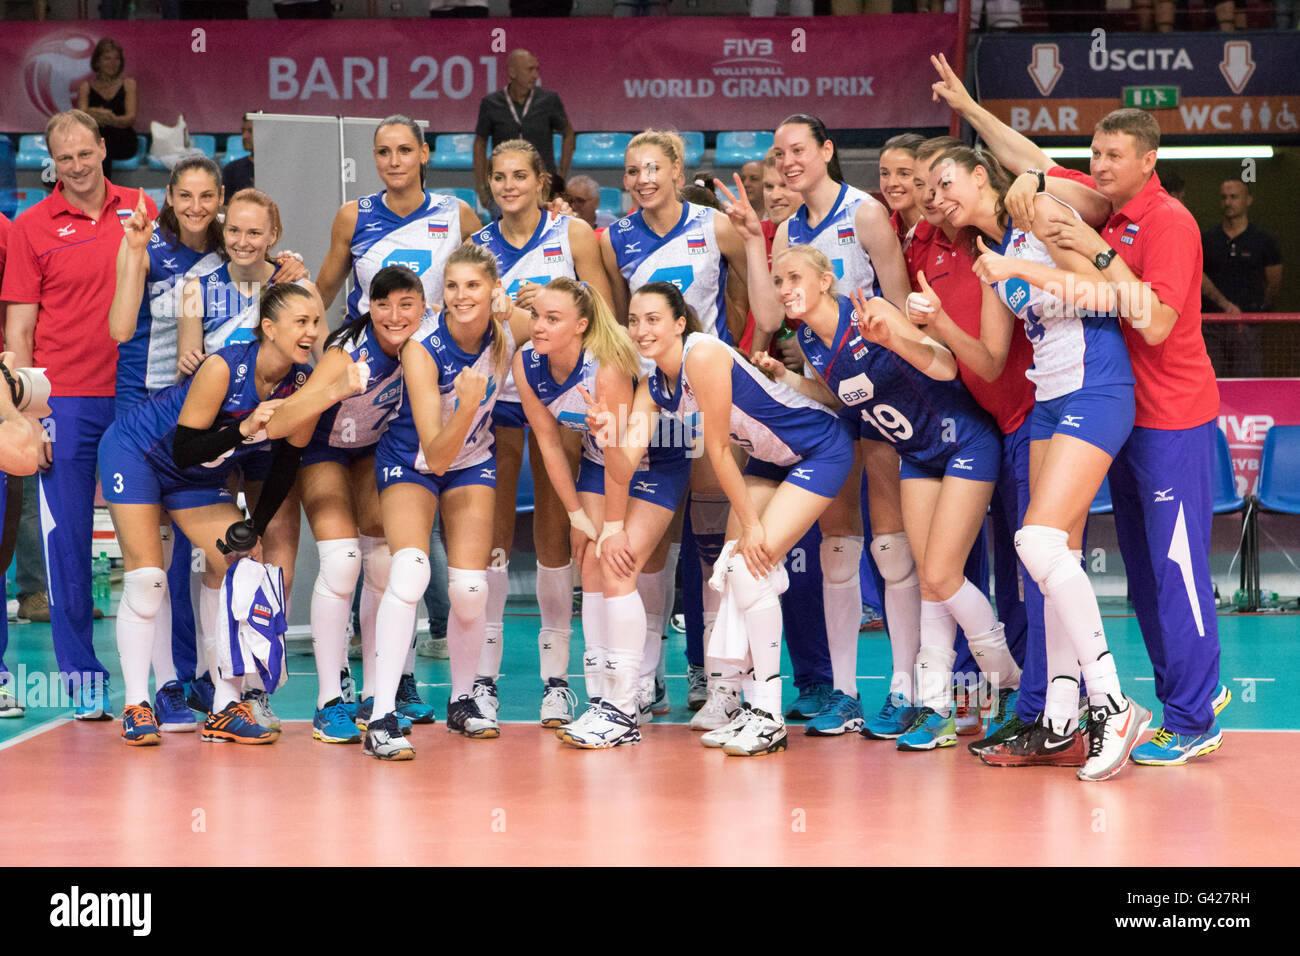 Bari, Italy. 17th June, 2016. Russian Team posing for official photographers after they won their FIVB World Grand Prix 2016 Pool F1 Group 1 Women match between Russia and Netherlands at PalaFlorio sports hall. Nicola Mastronardi/Alamy Live News Stock Photo